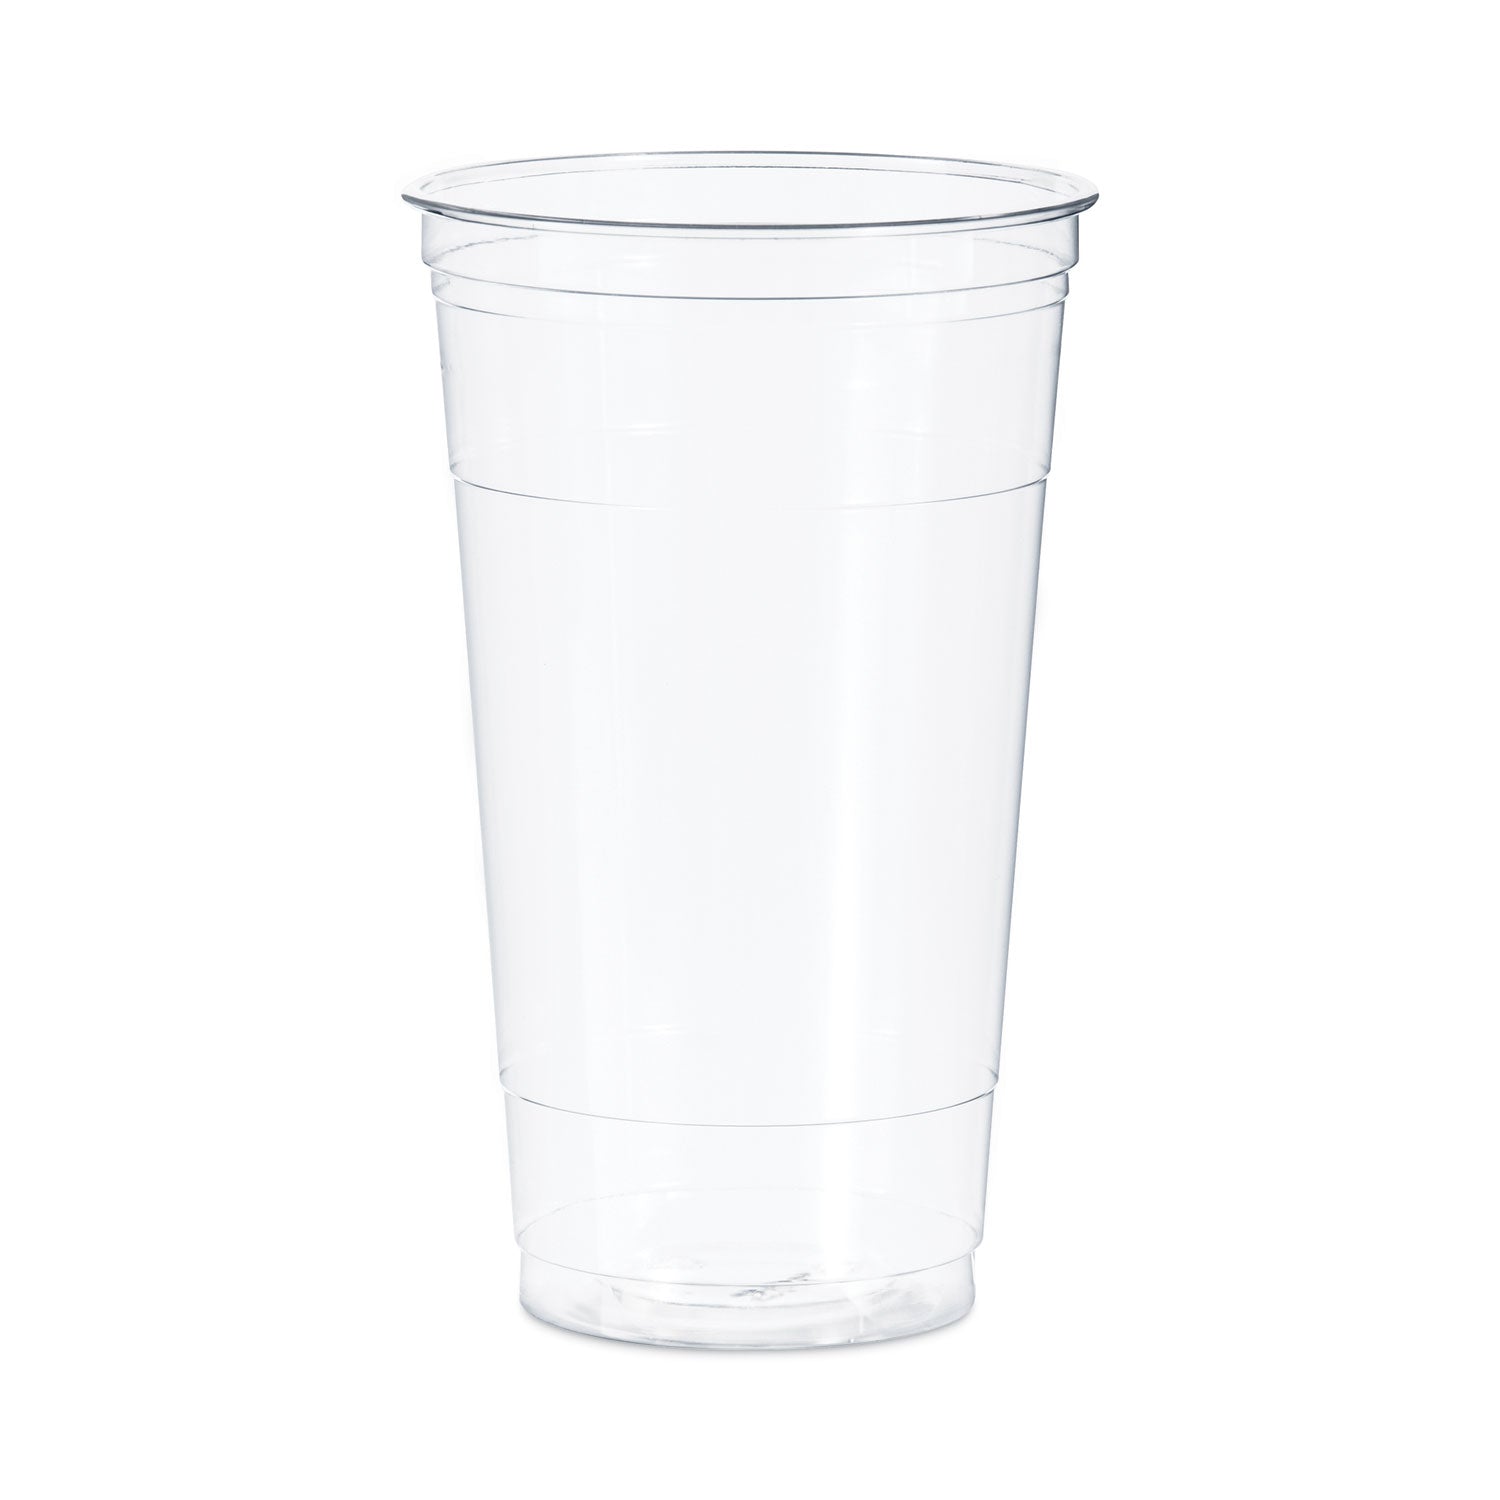 Ultra Clear PETE Cold Cups, 32 oz, Clear, 300/Carton - 